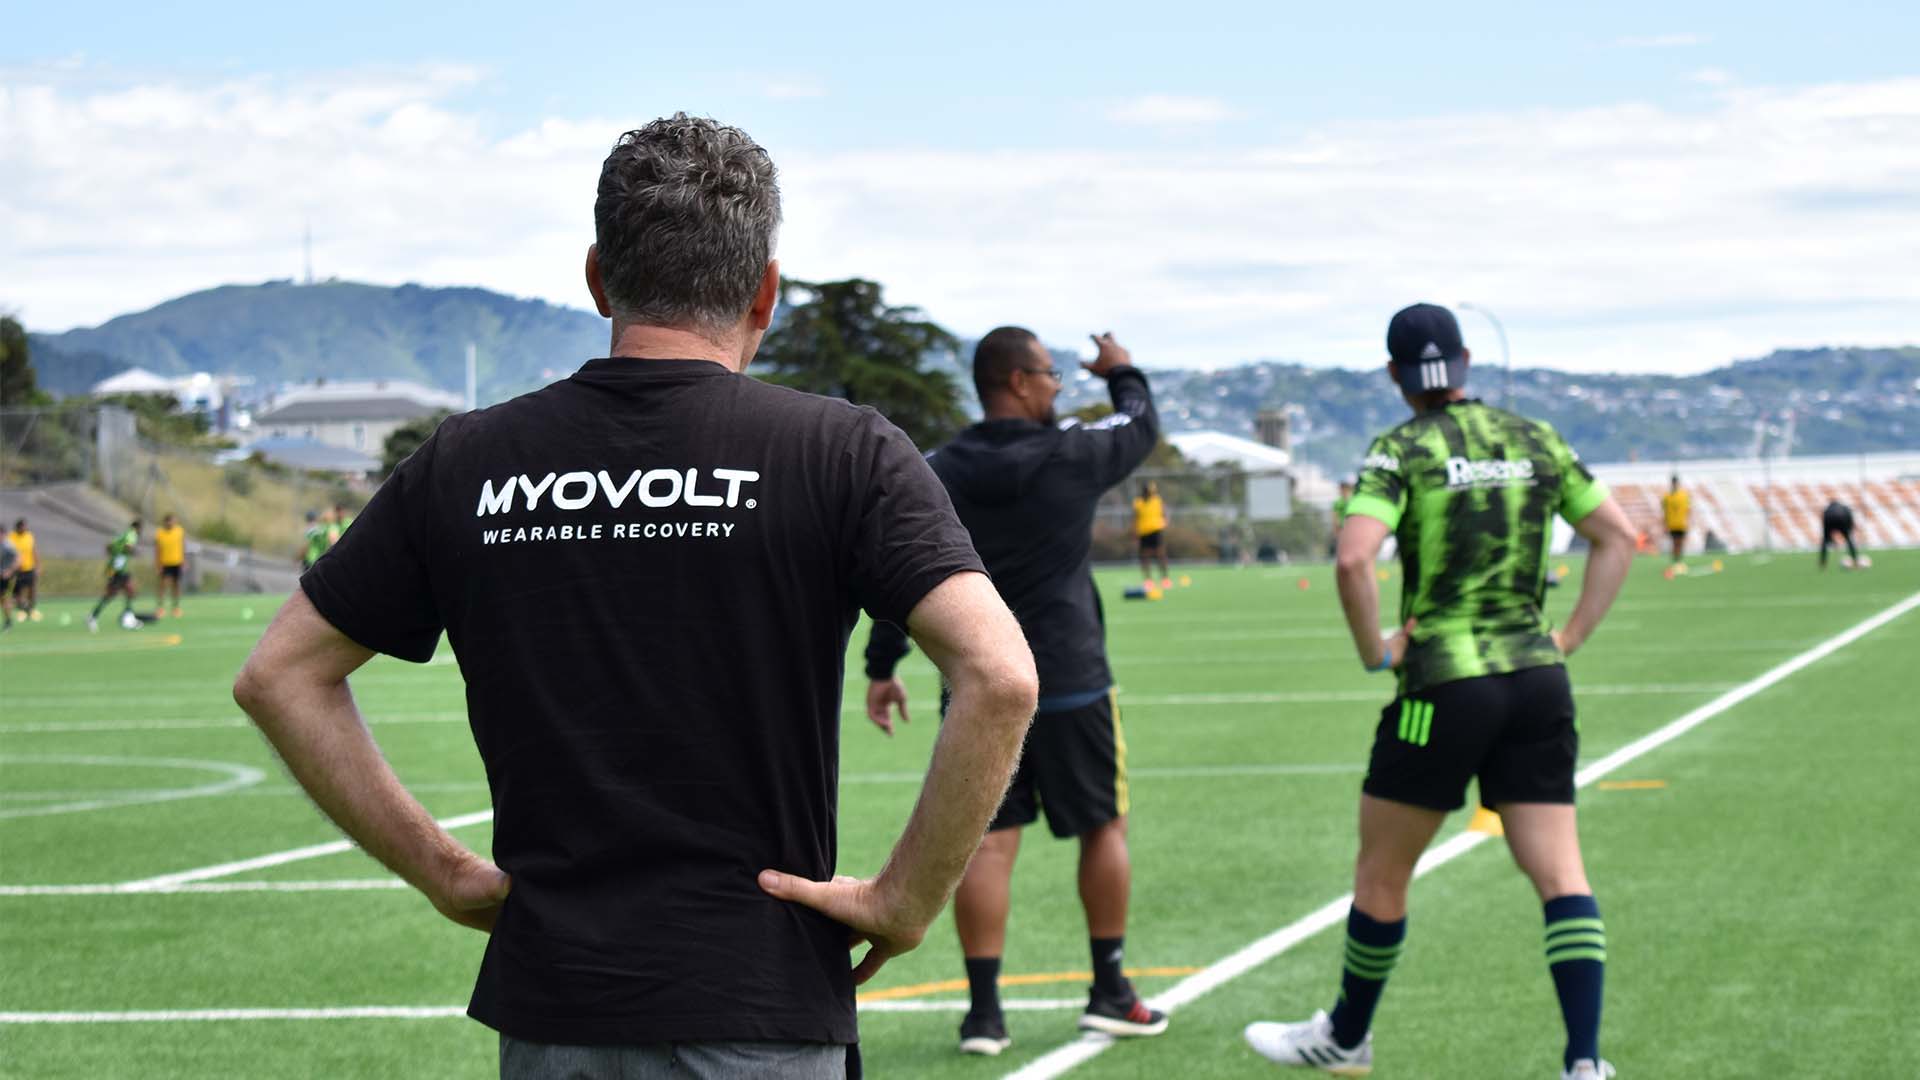 Myovolt announced as official recovery partner of the Hurricanes Super Rugby team. 